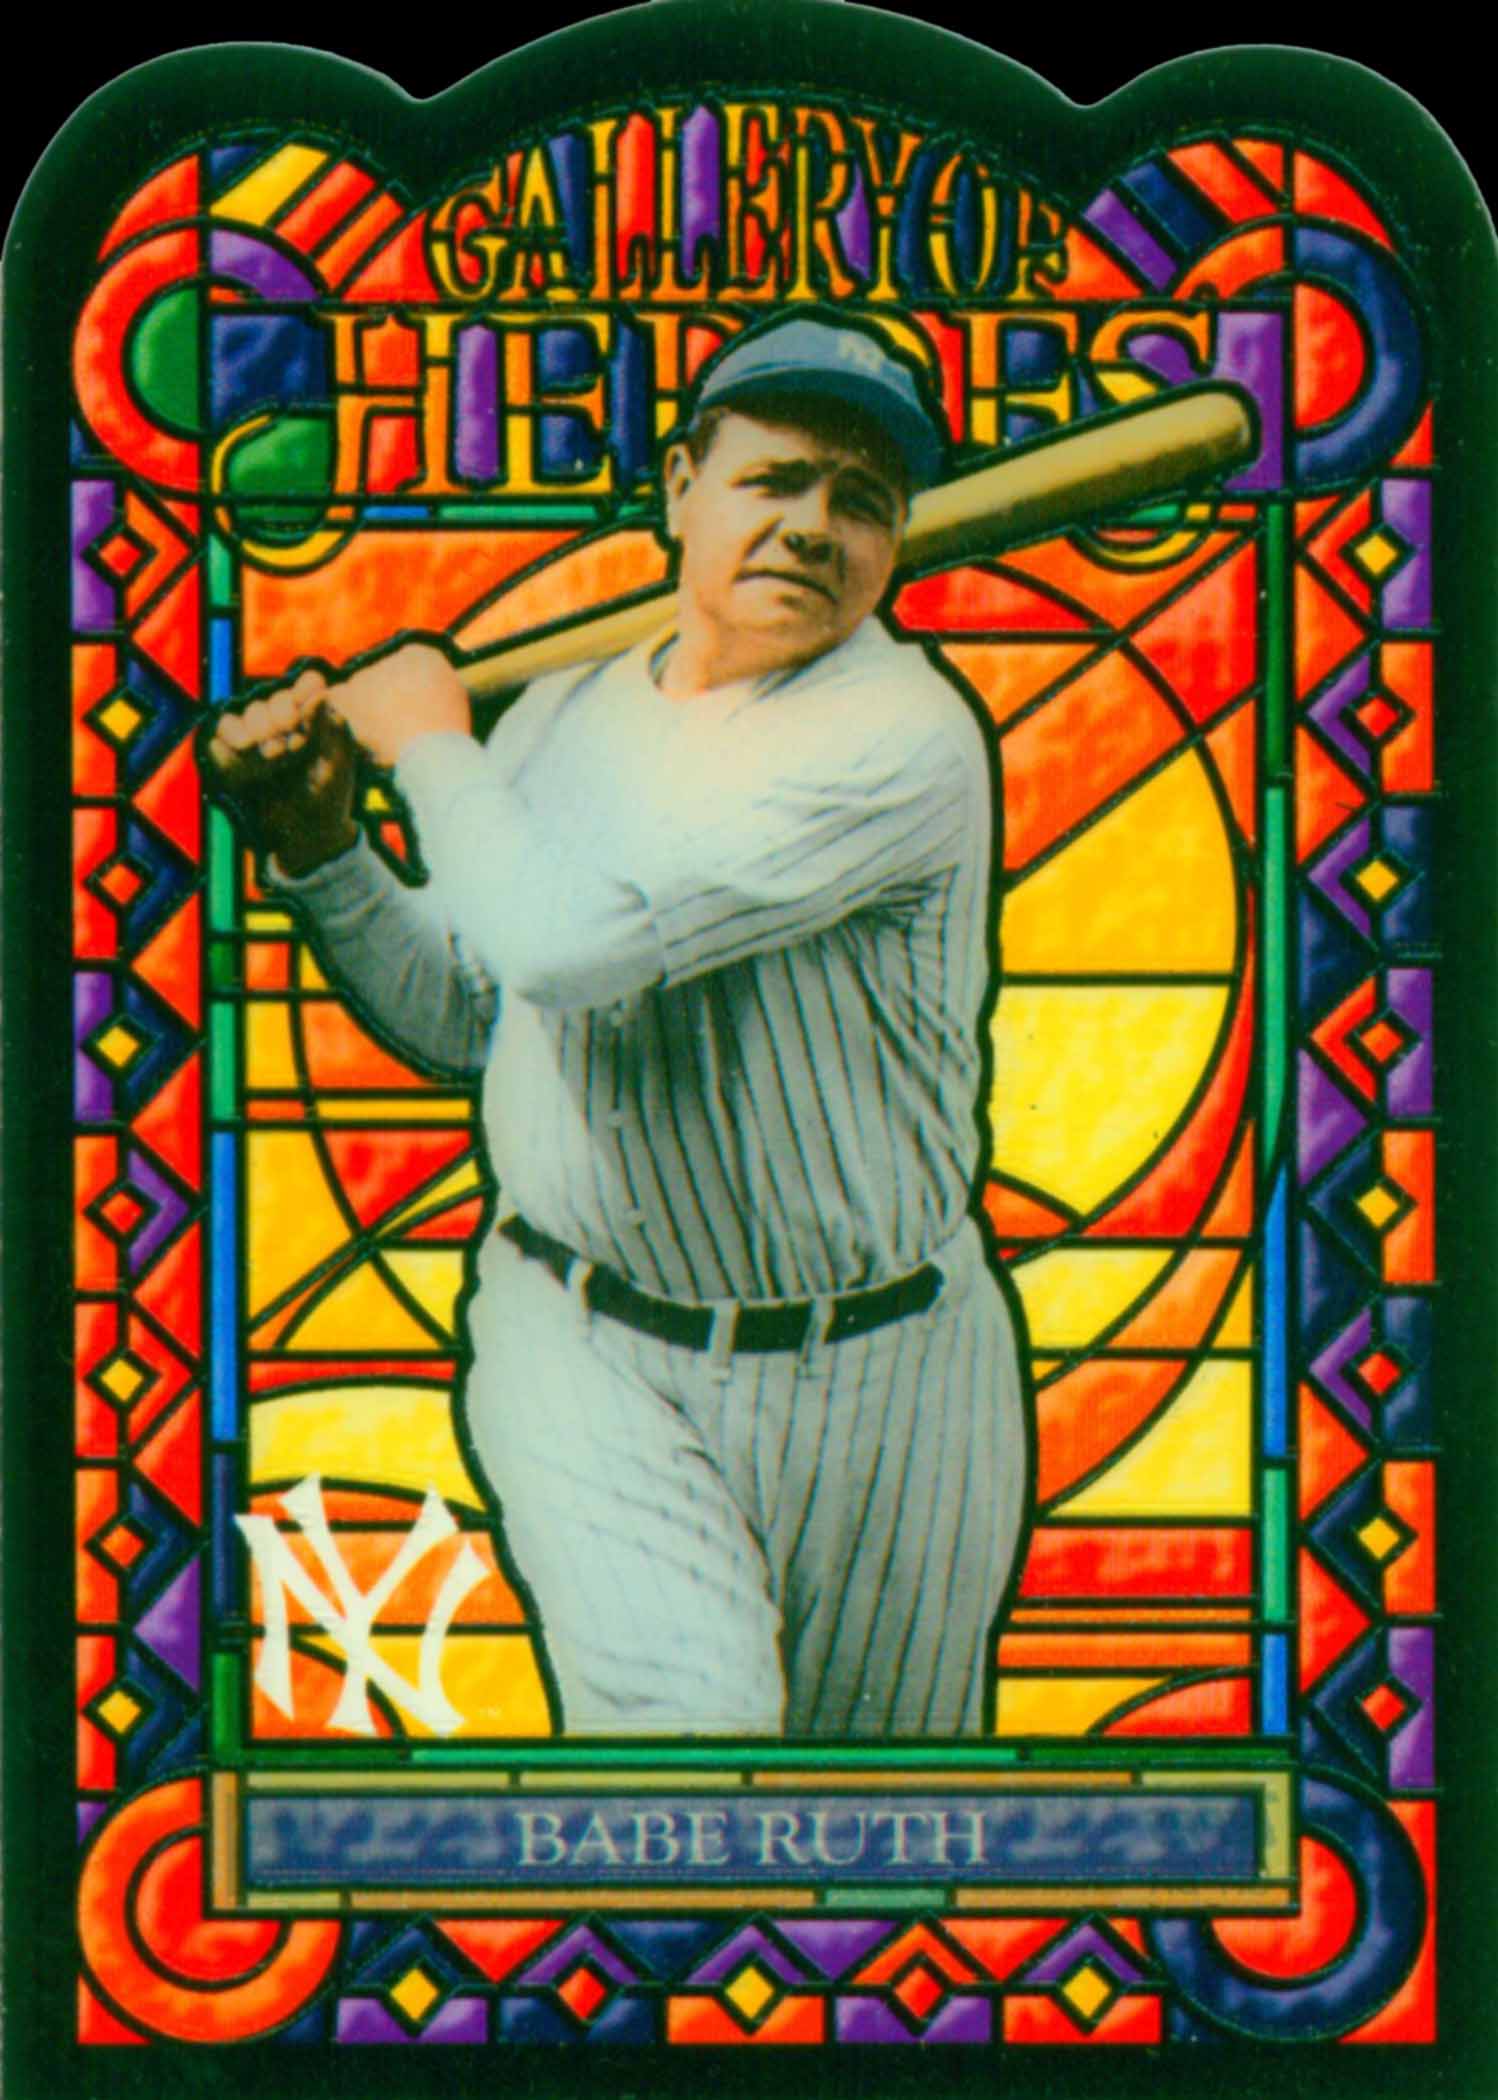 2013 Topps Archives Gallery Of Heroes